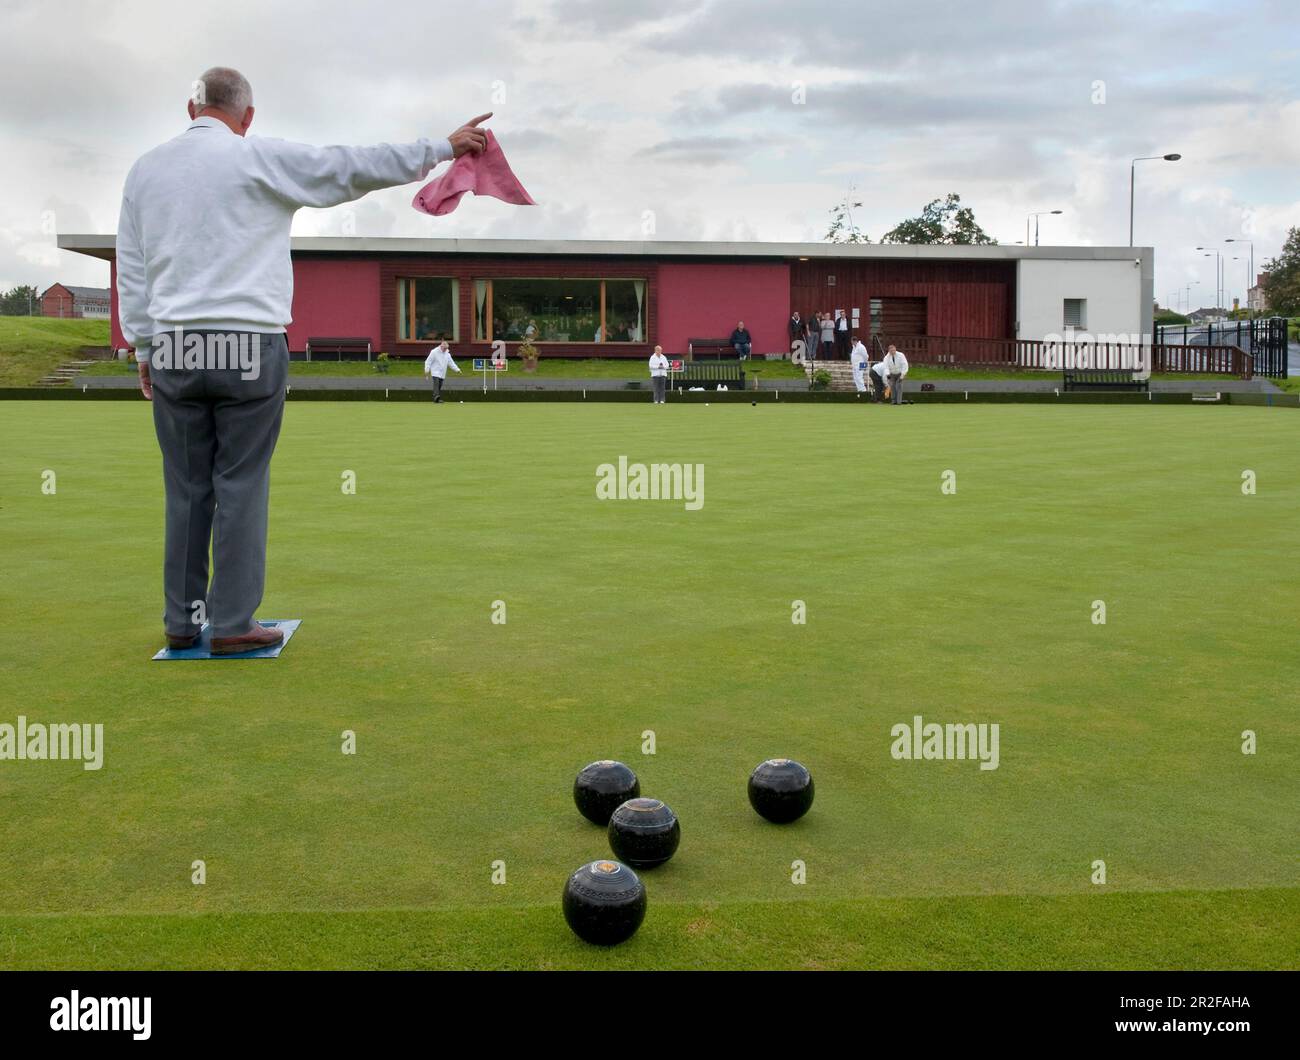 An older man waves a flag during bowls play in front of the red pavilion clubhouse at the Balornock lawn bowling green in Glasgow, Scotland, UK Stock Photo